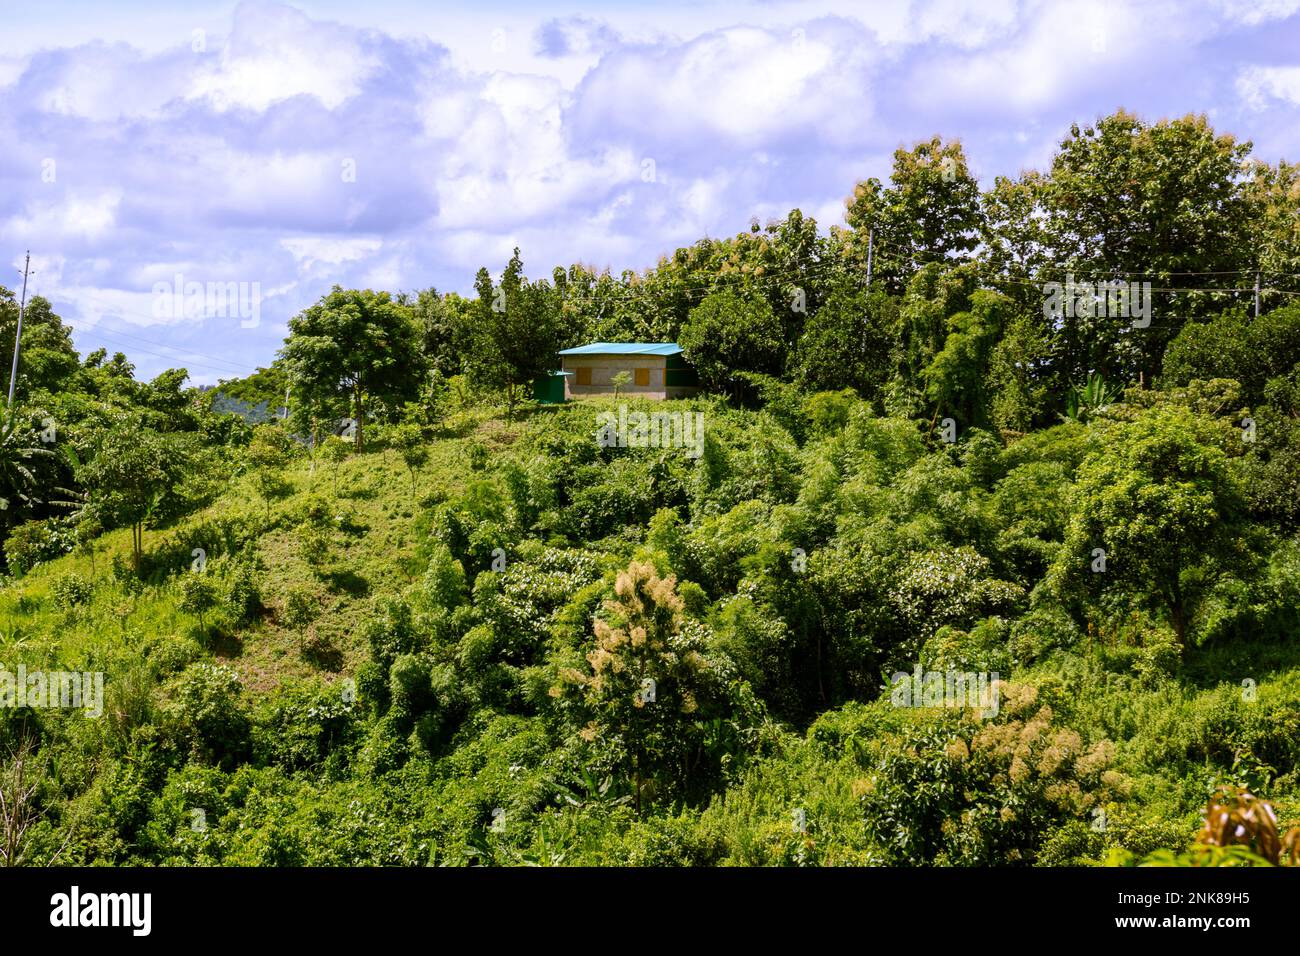 The Jhum house is a temporary housing for living. This photo was taken from Meghla, Bandarban,Chittagong, Bangladesh. Stock Photo